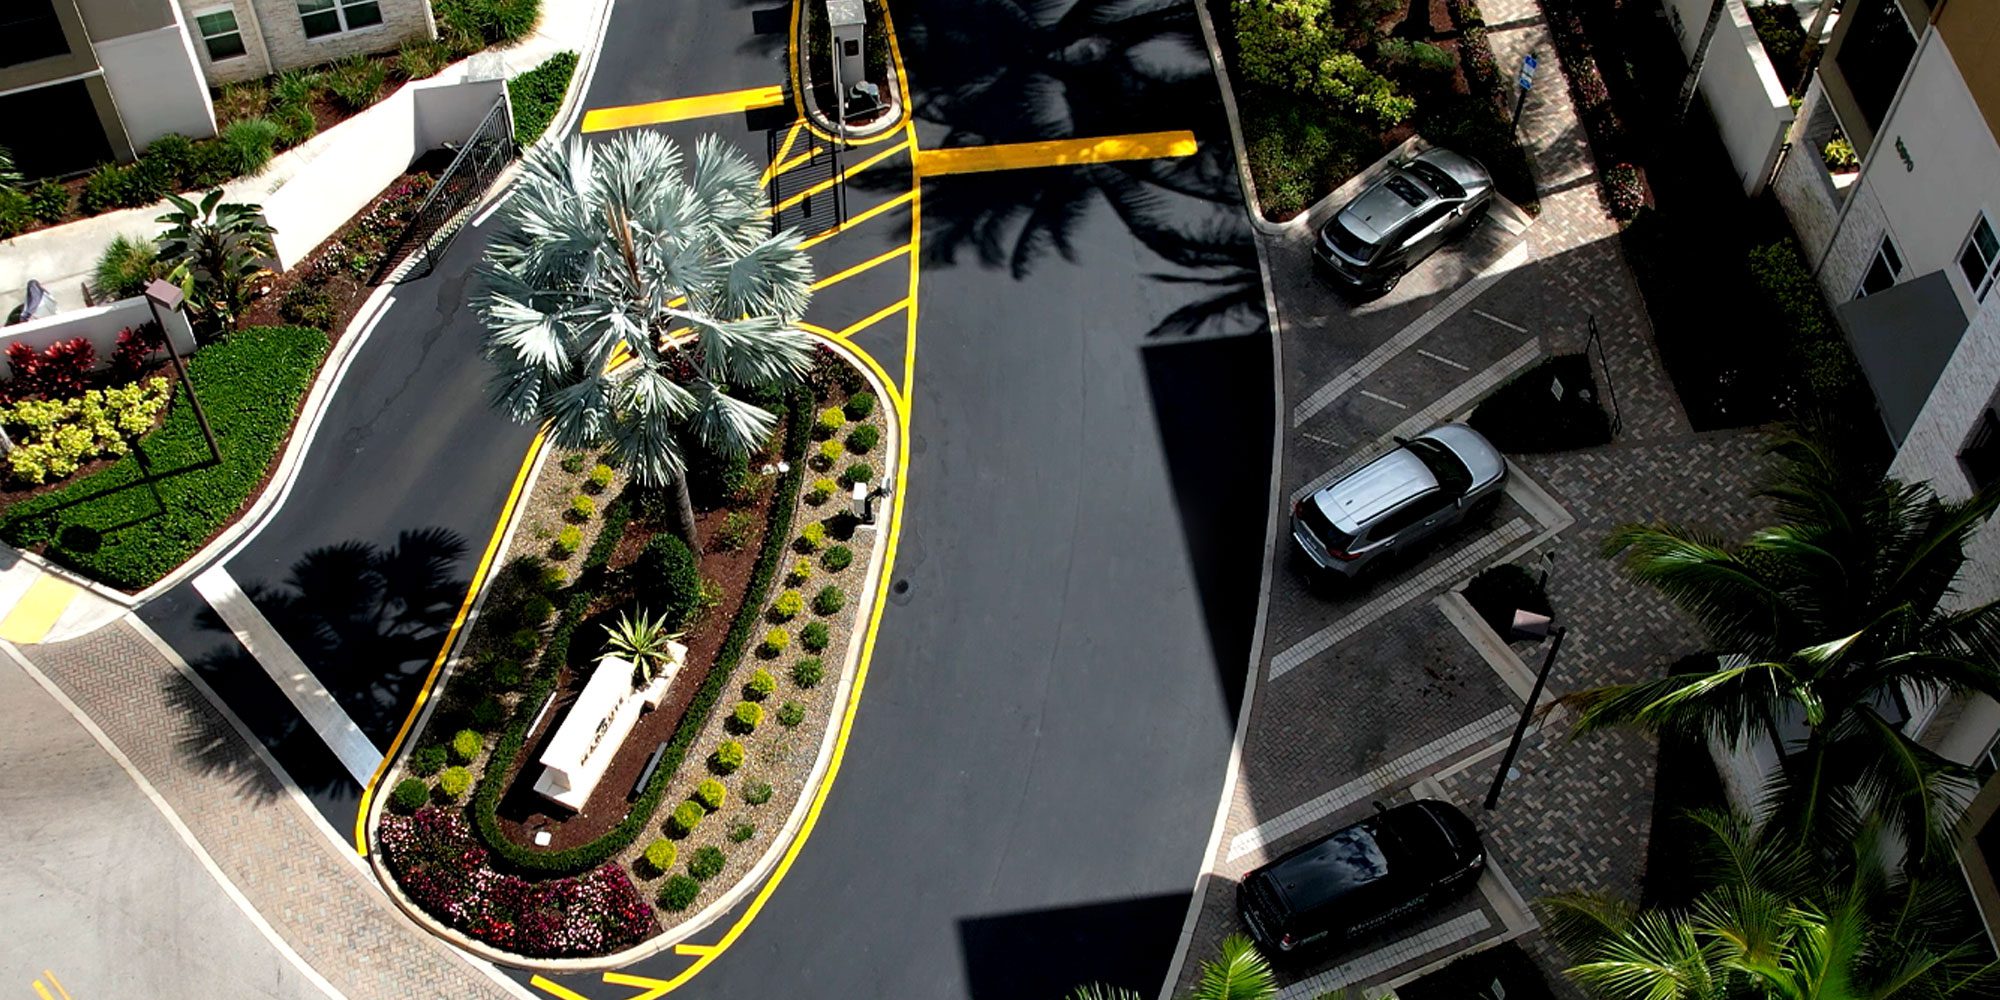 Aerial view of a South Florida HOA parking lot entryway that's beautifully landscaped with crosswalk, asphalt and concrete Freshly paved, sealcoating & striped using vinyl and thermoplastic striping at a country club gold course and attached condominium community in Coral Springs, FL by 3-D Paving and Sealcoating. South Florida's Premier Commercial Paving Contractor. April 2023. Considering an asphalt paving contract for 2023? Learn about asphalt paving systems in south florida from the experts at 3-D Paving and Sealcoating in Coral Springs, FL. 3-D Paving also serves West Palm Beach and greater Palm Beach, Florida. Need asphalt in Delray Beach? Are you looking for Sealcoating in Deray Beach? Call the experts at 3-D Paving and Sealcoating! Need asphalt or concrete in Coconut Creek? Look no further then 3-D Paving and Sealcoating. Asphalt Paving Sunrise Florida, Sealcoating Sunrise, FL. Asphalt paving in Naples, FL. Asphalt Paving Fort Myers.